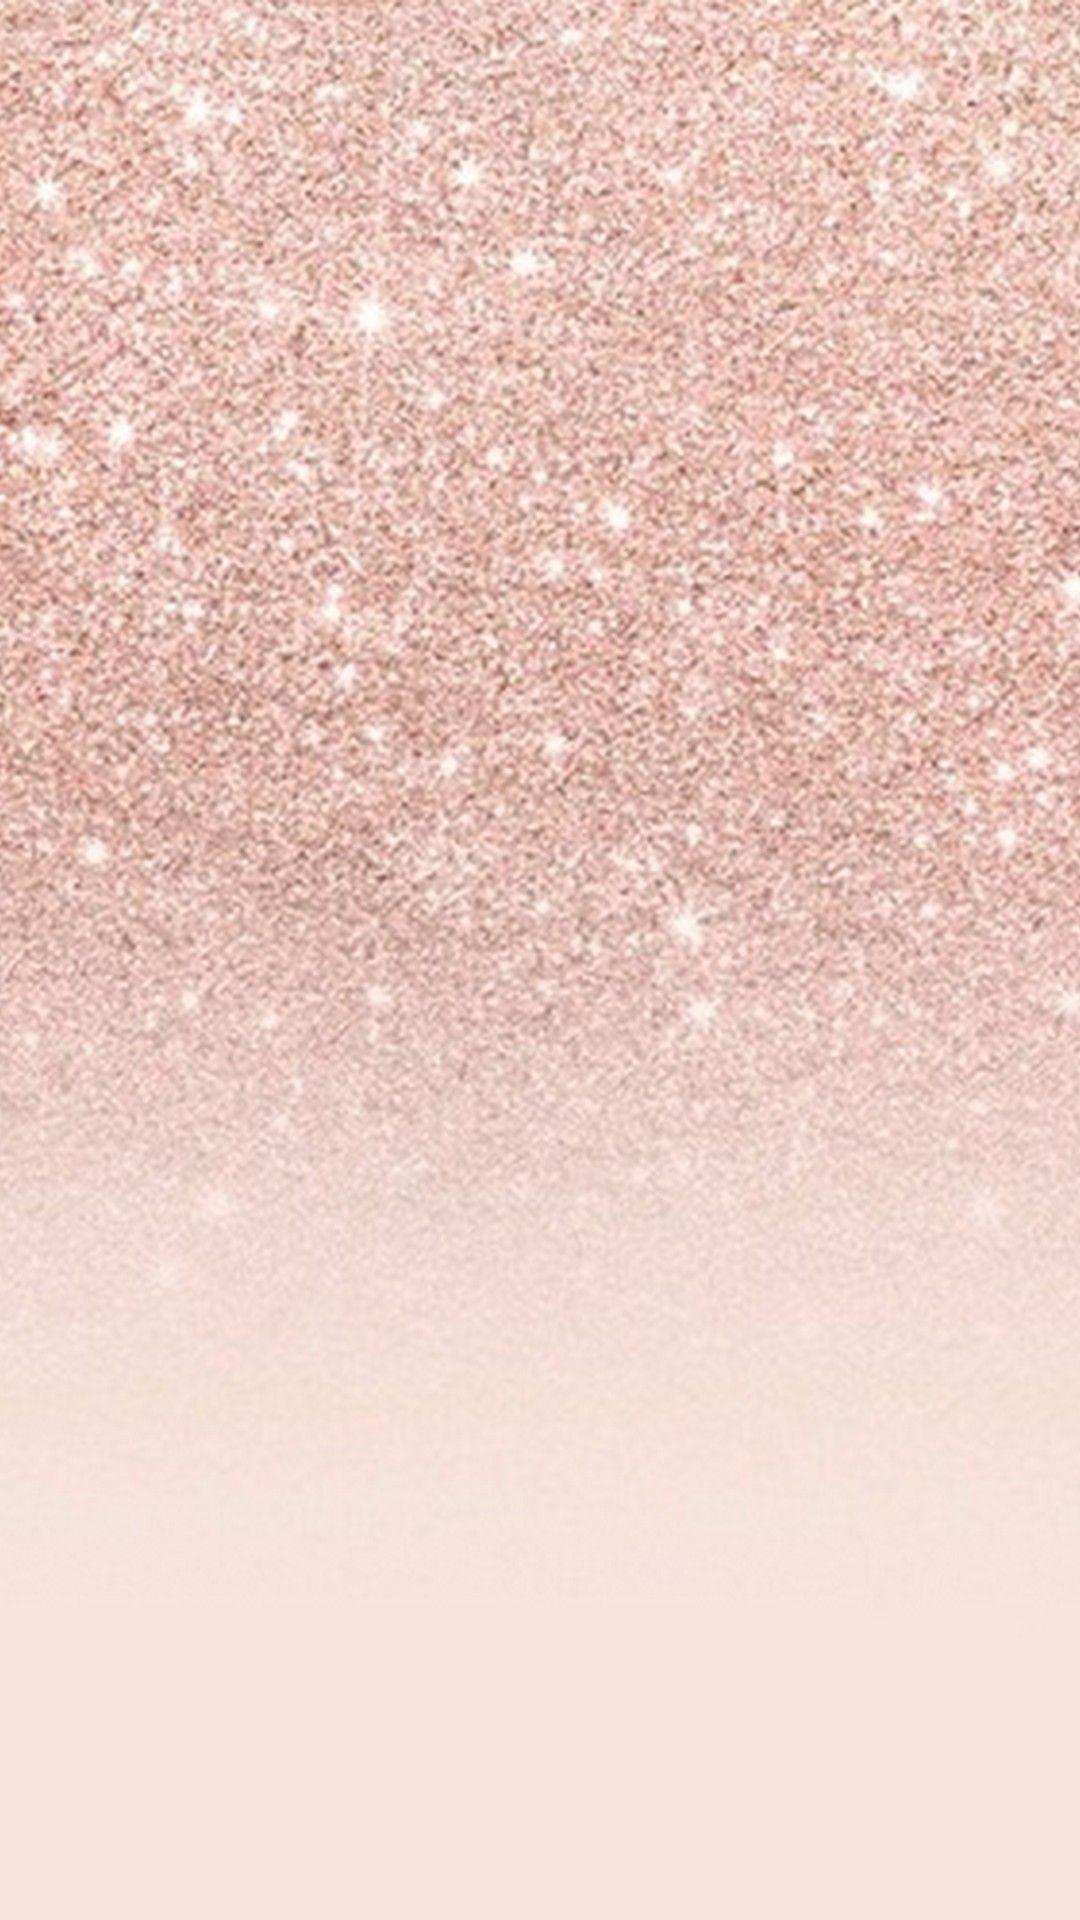 Rose Gold Ombre Wallpaper Free Rose Gold Ombre Background